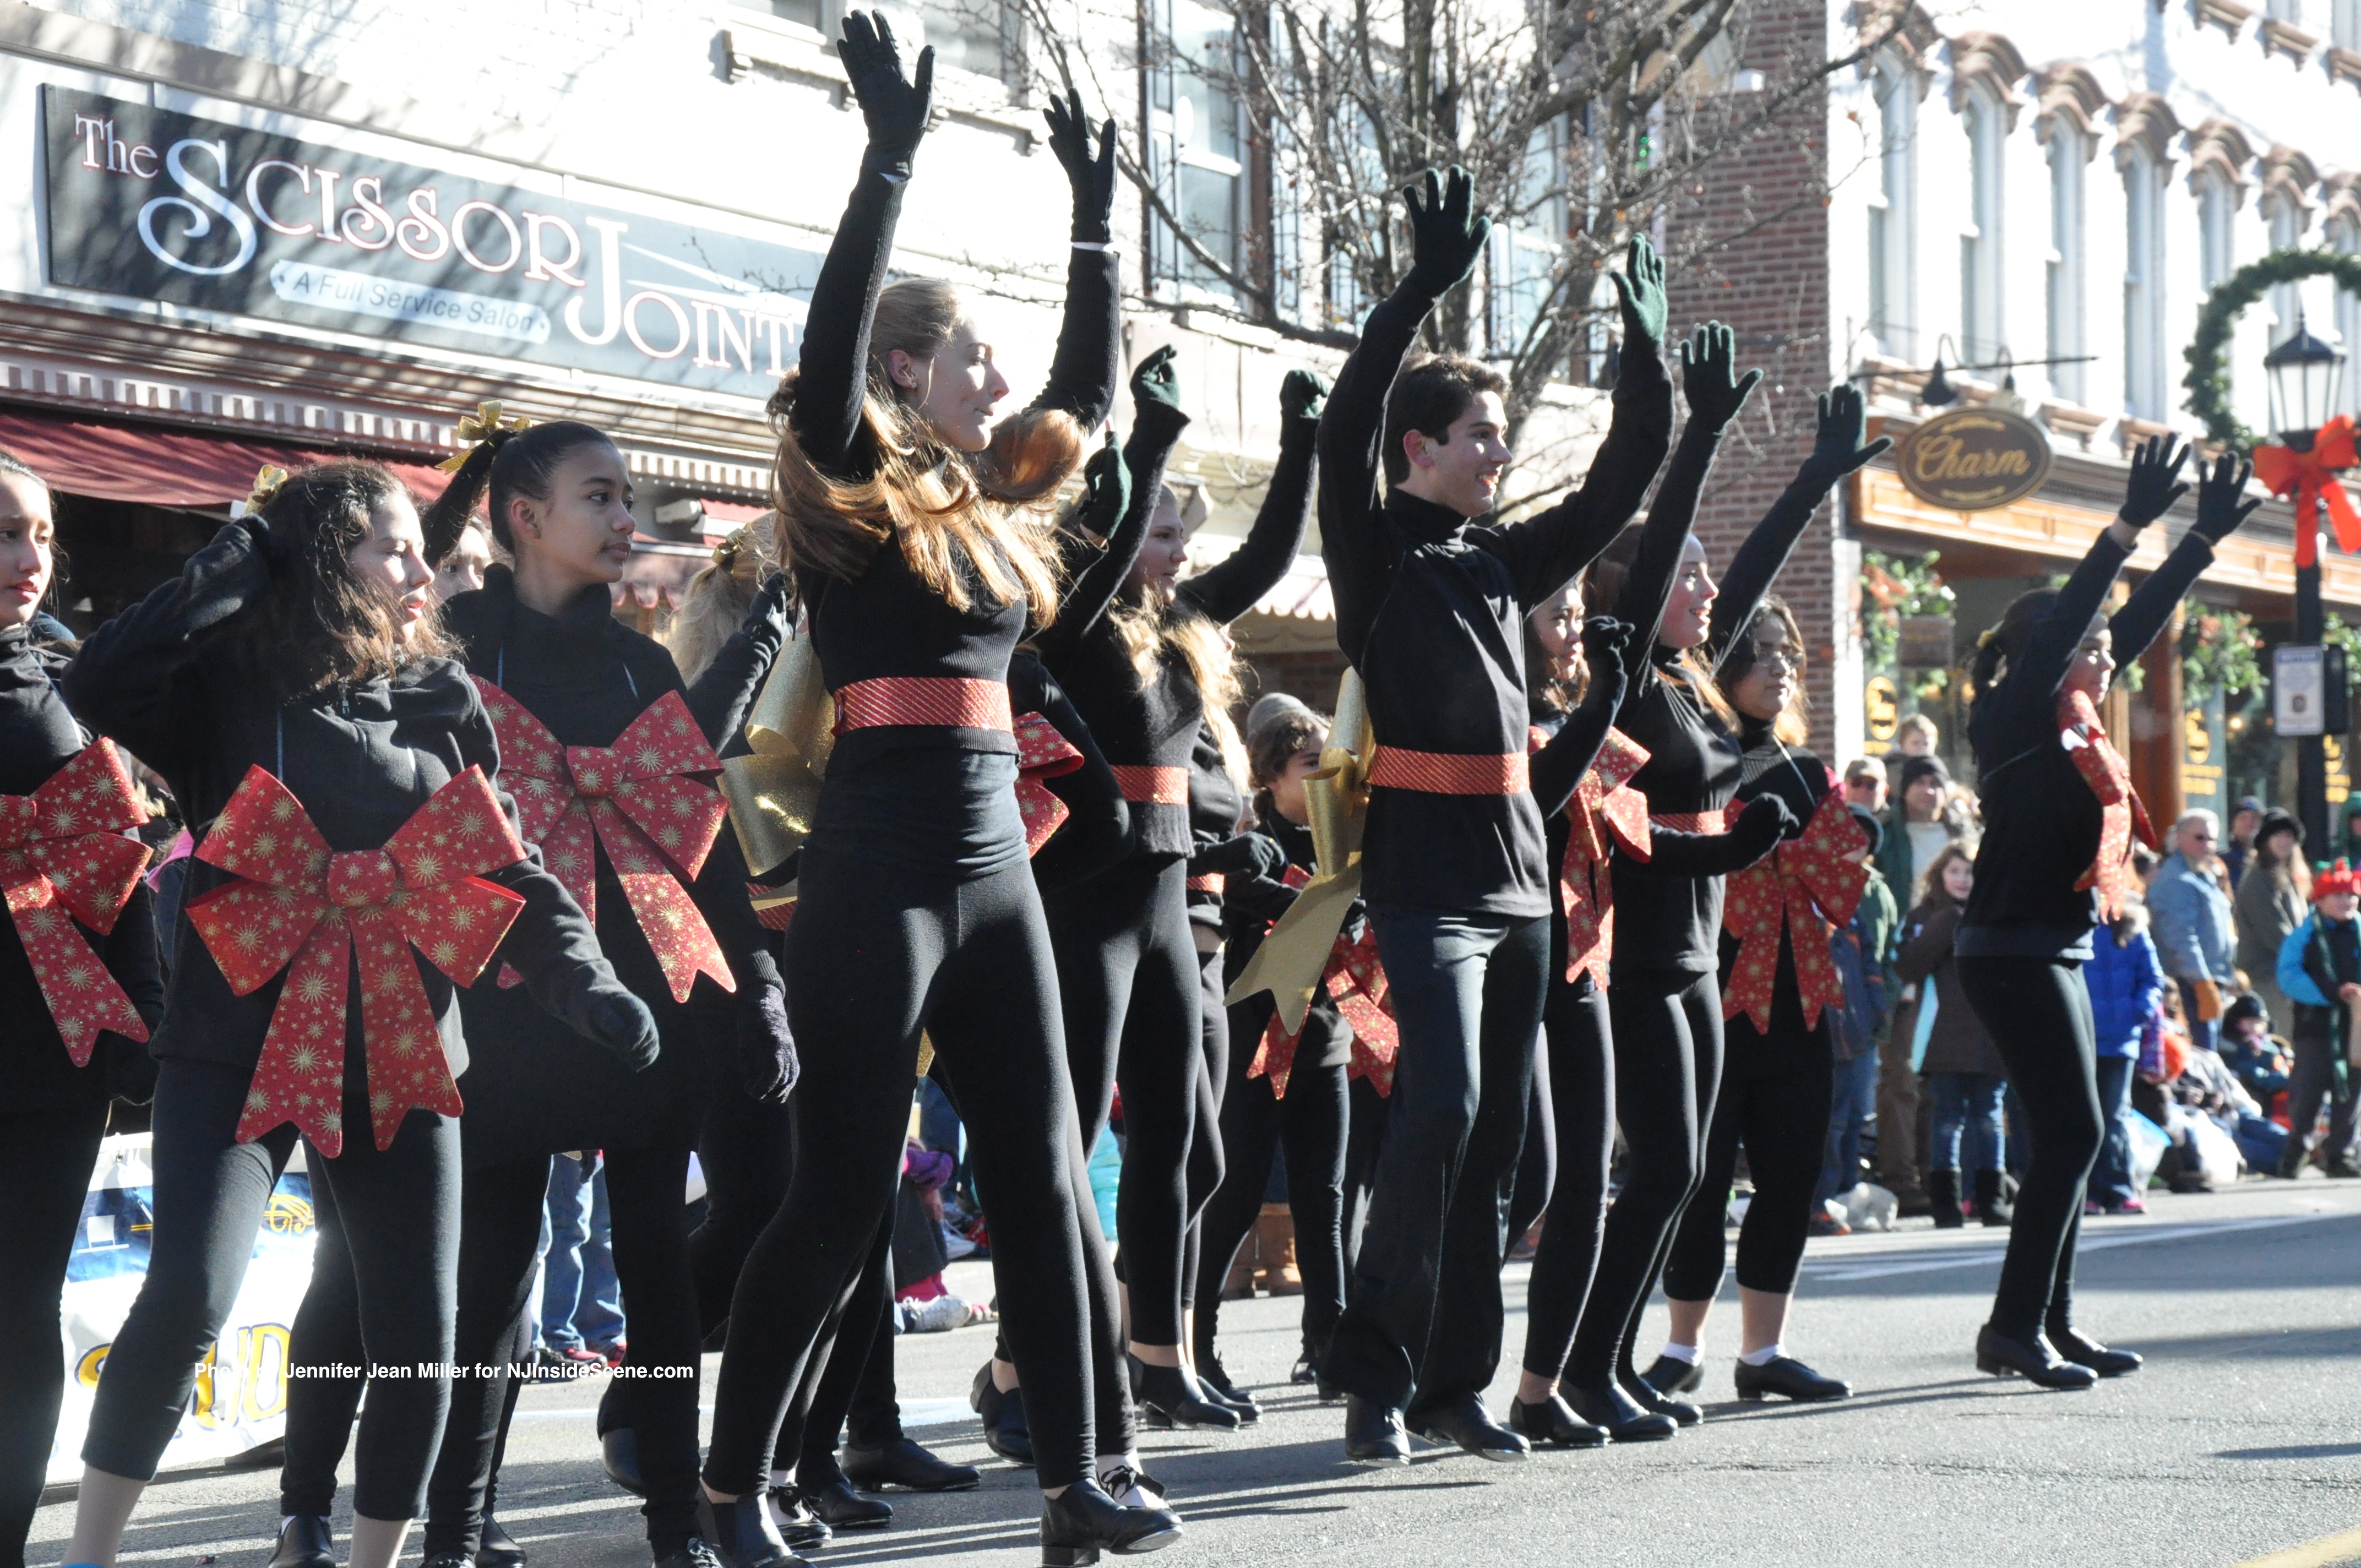 Dancers from D'Marge Dance Studio perform for spectators on both sides of the street.